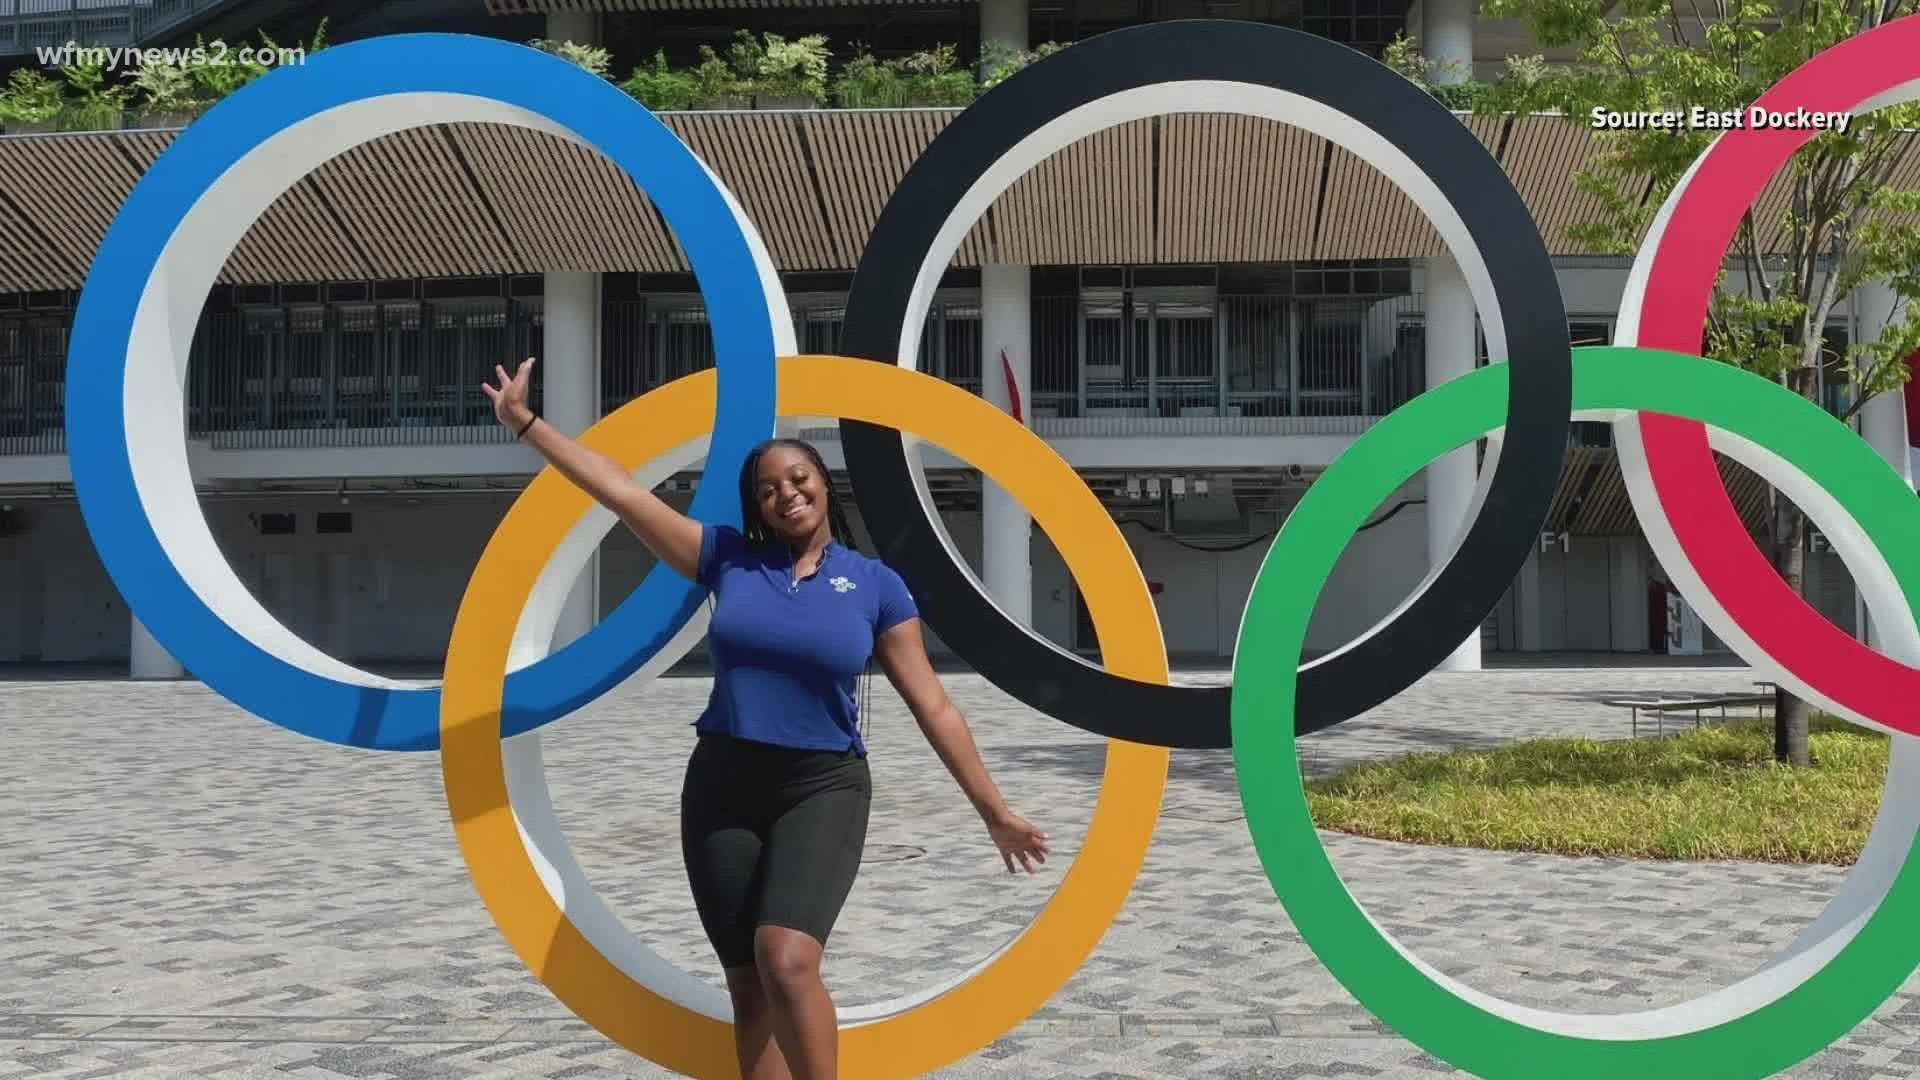 Aggie senior, East Dockery, was selected to work with the production team for multiple events at the Tokyo 2020 summer Olympics.